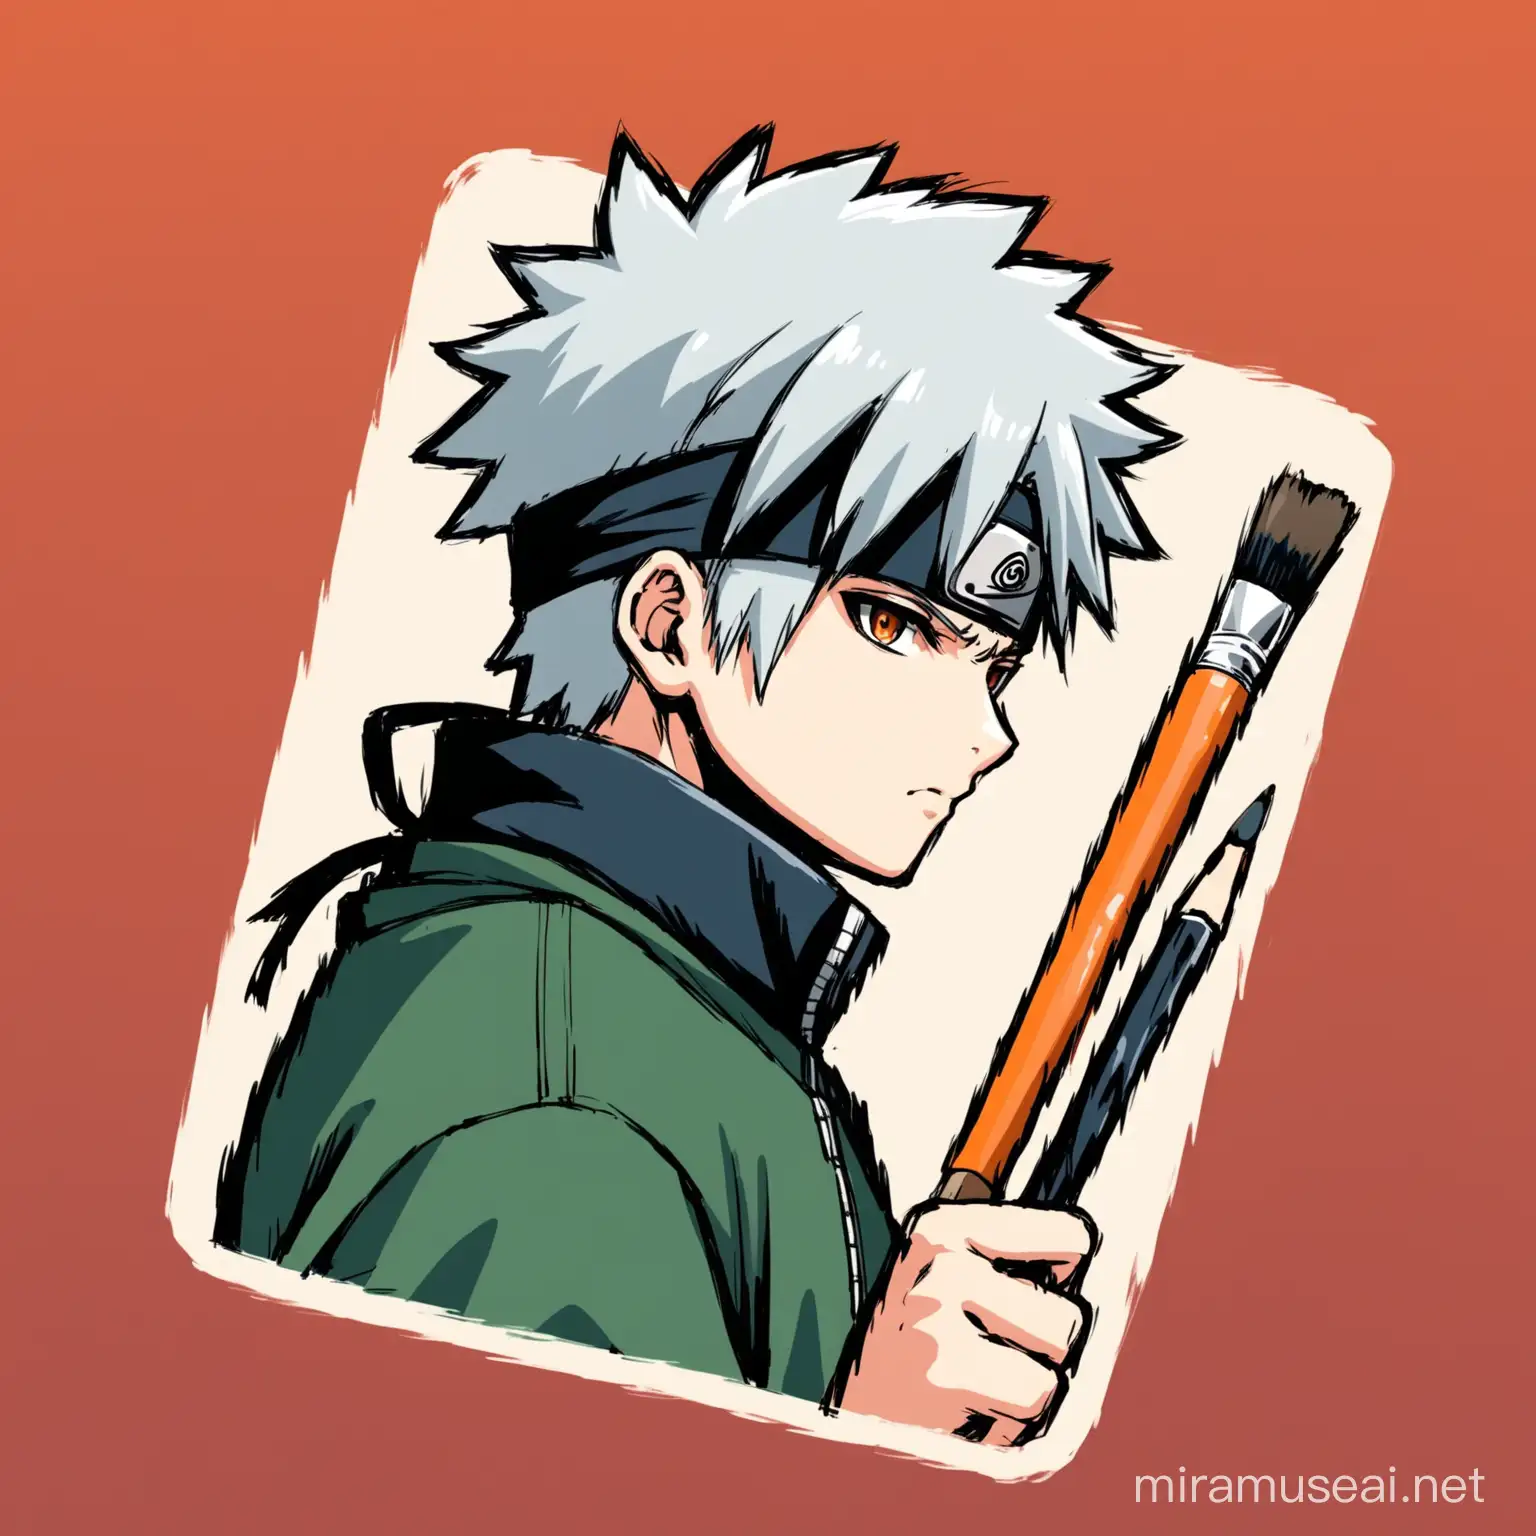 Kakashi hatake from Naruto holding drawing pencils or paint brushes, make it look like a logo for a youtube channel 